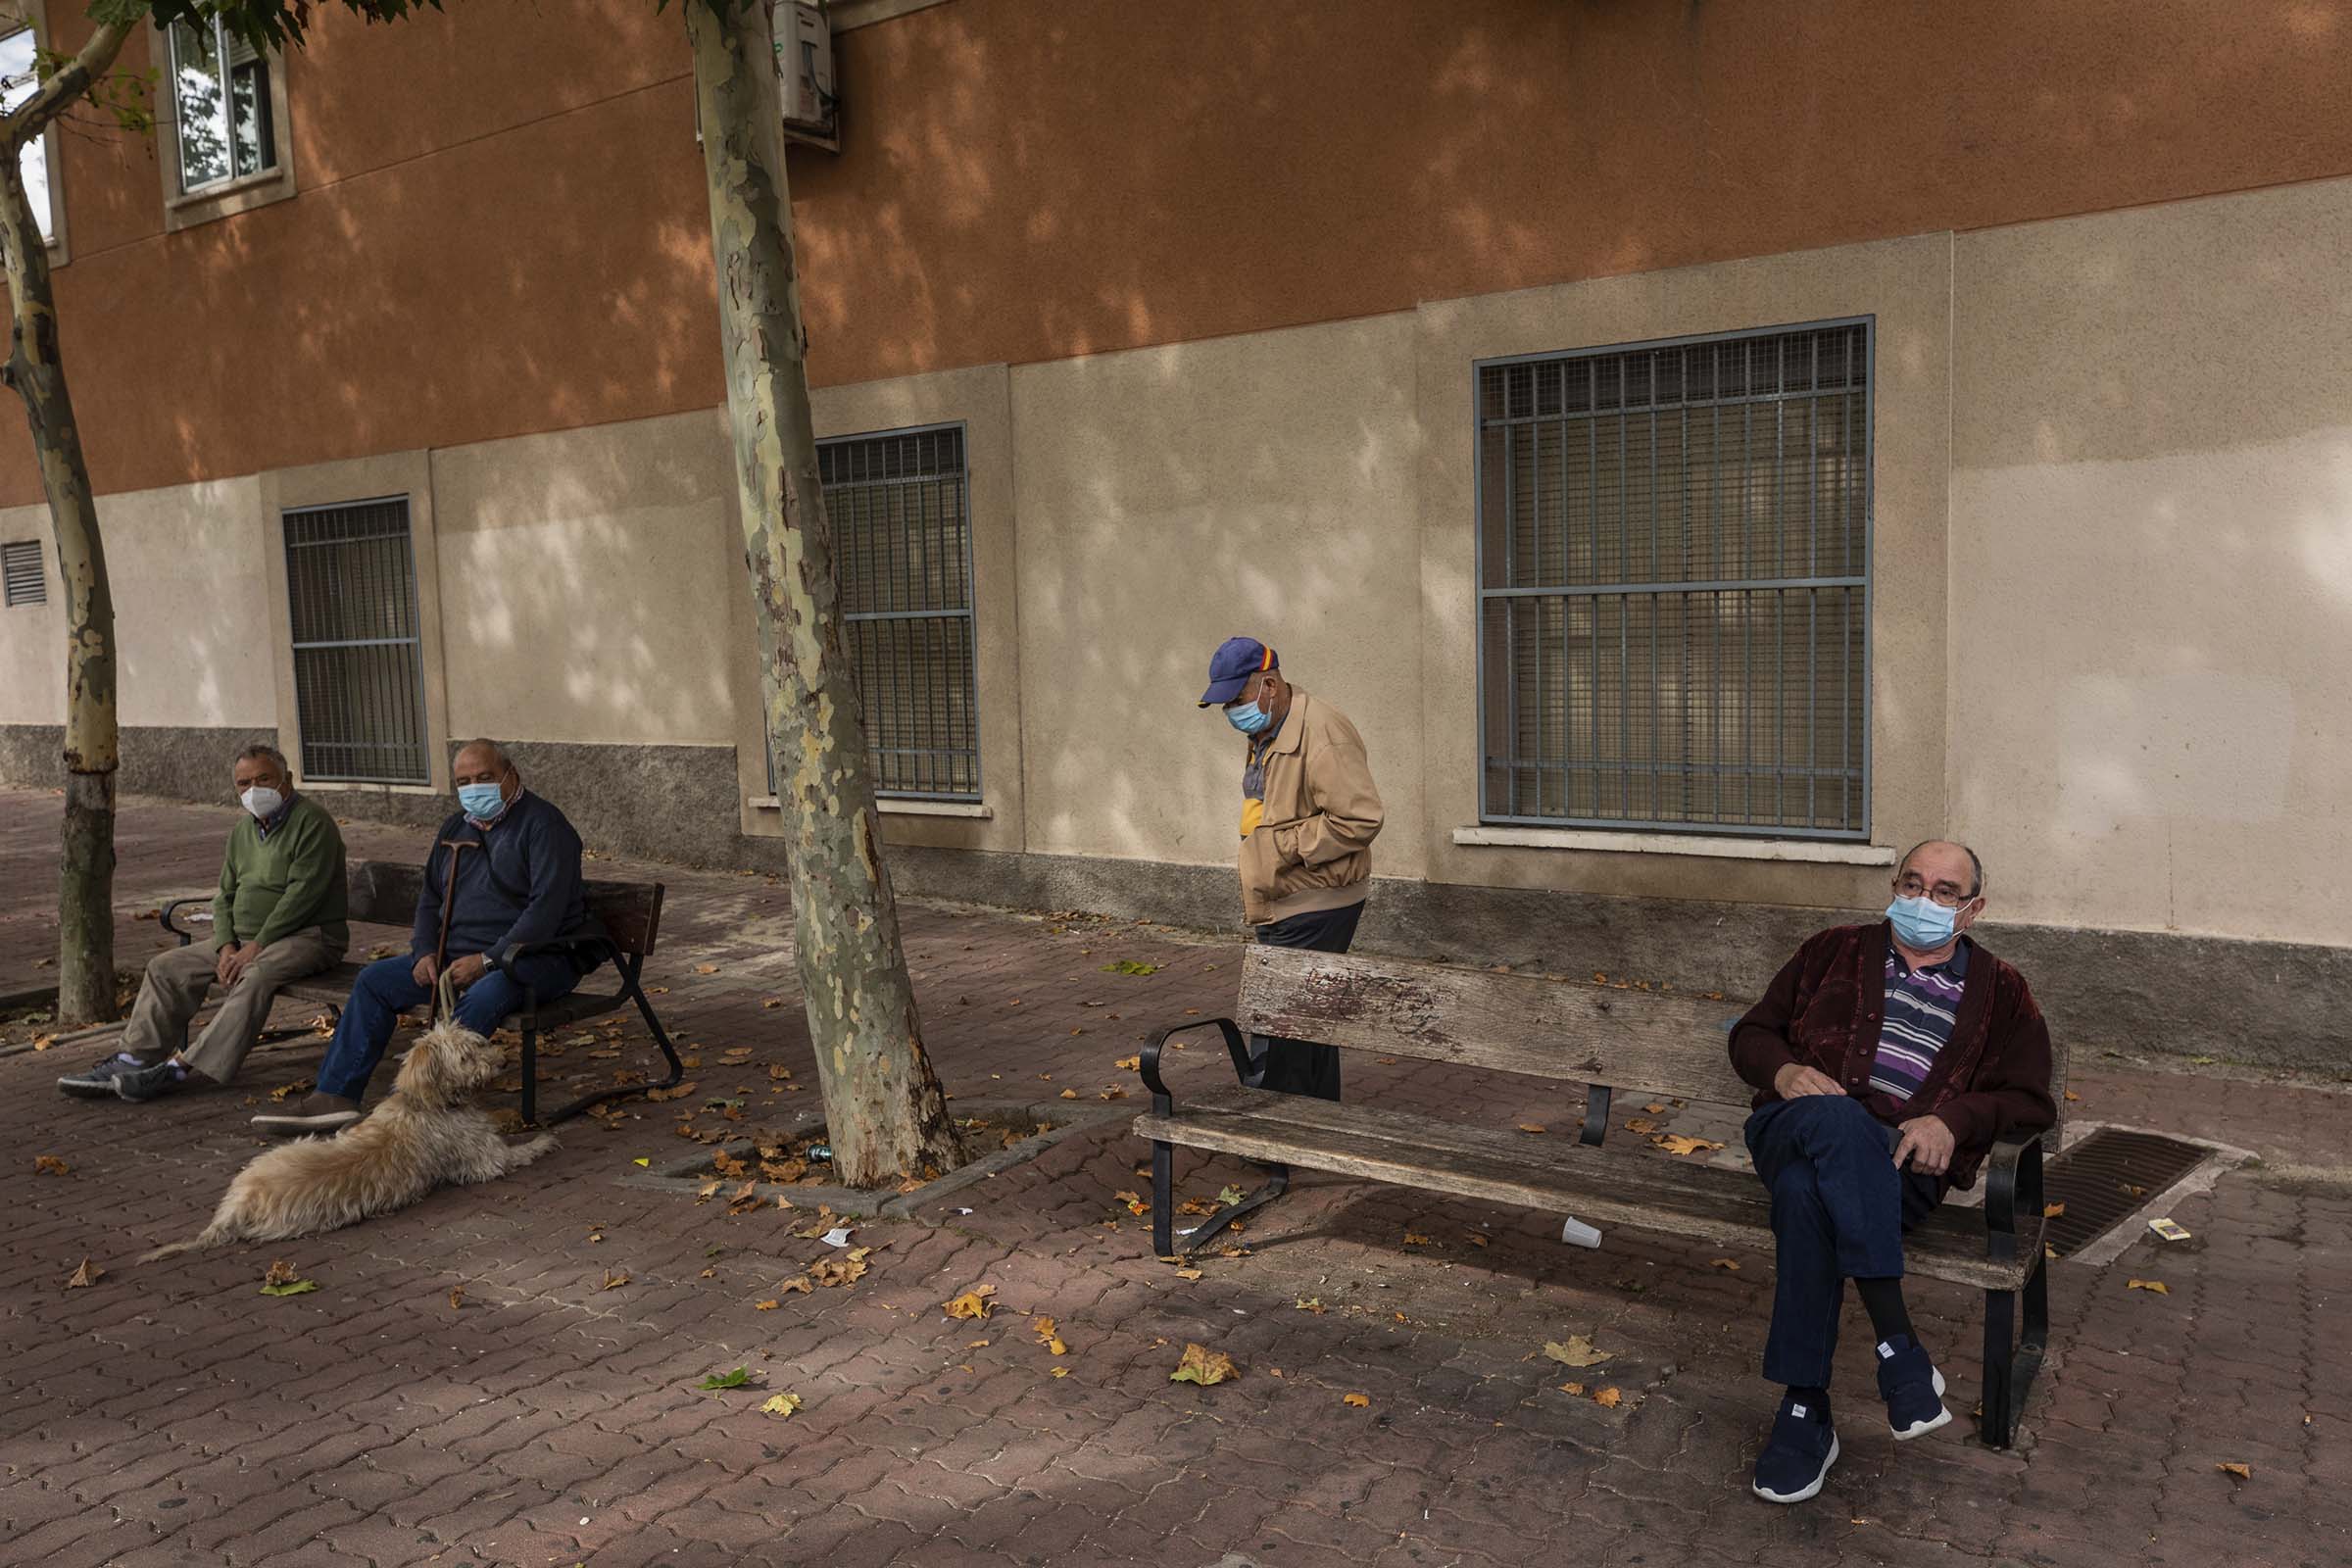 Elders wearing face masks to prevent the spread of the coronavirus sit on a park in Madrid, Spain, on Sept. 23, 2020. (Bernat Armangue—AP)